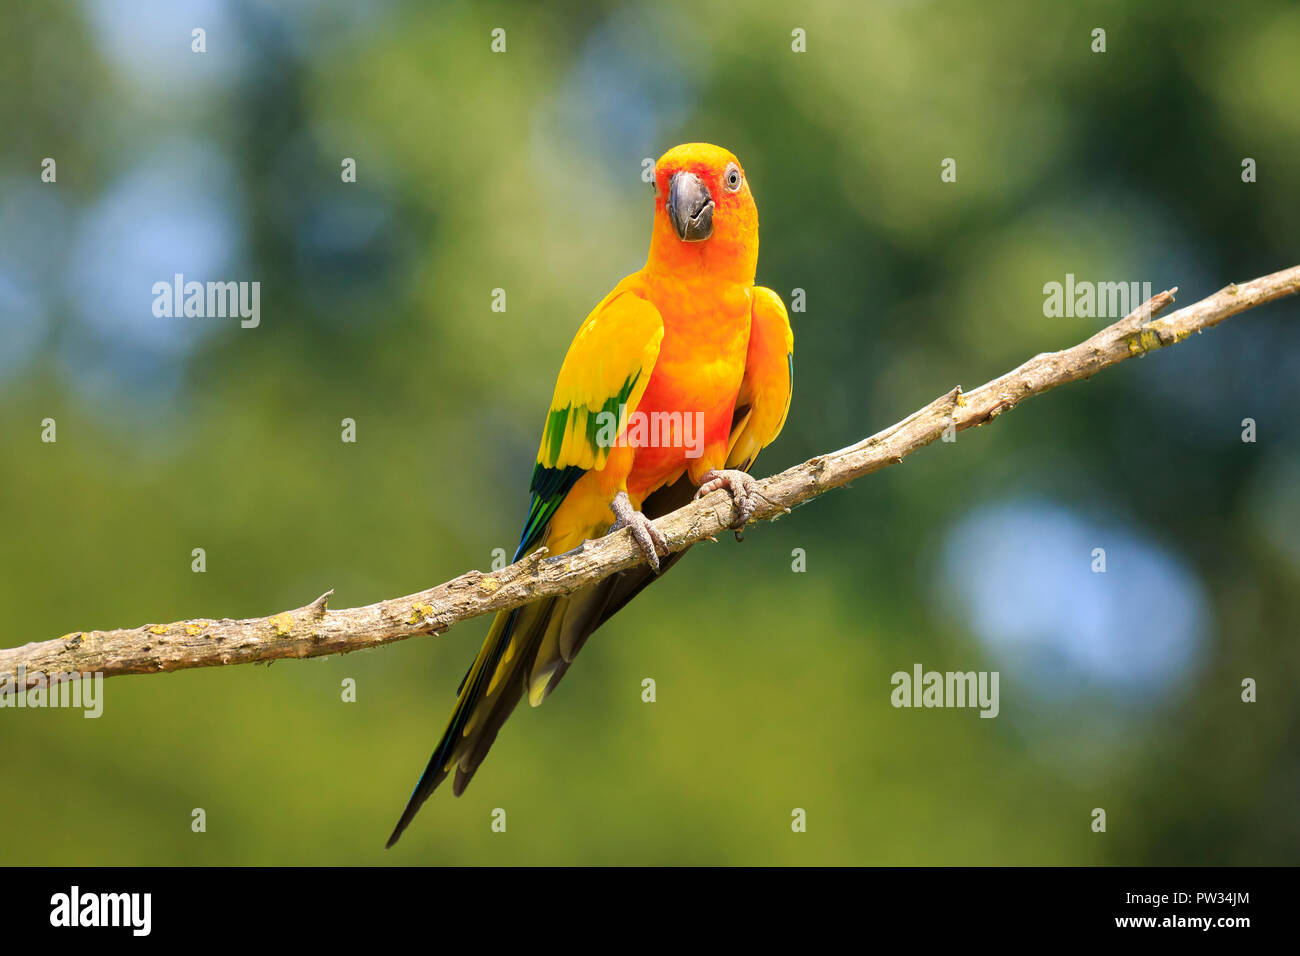 Closeup of sun parakeet or sun conure Aratinga solstitialis, bird. It is a medium-sized, vibrantly colored parrot native to northeastern South America Stock Photo